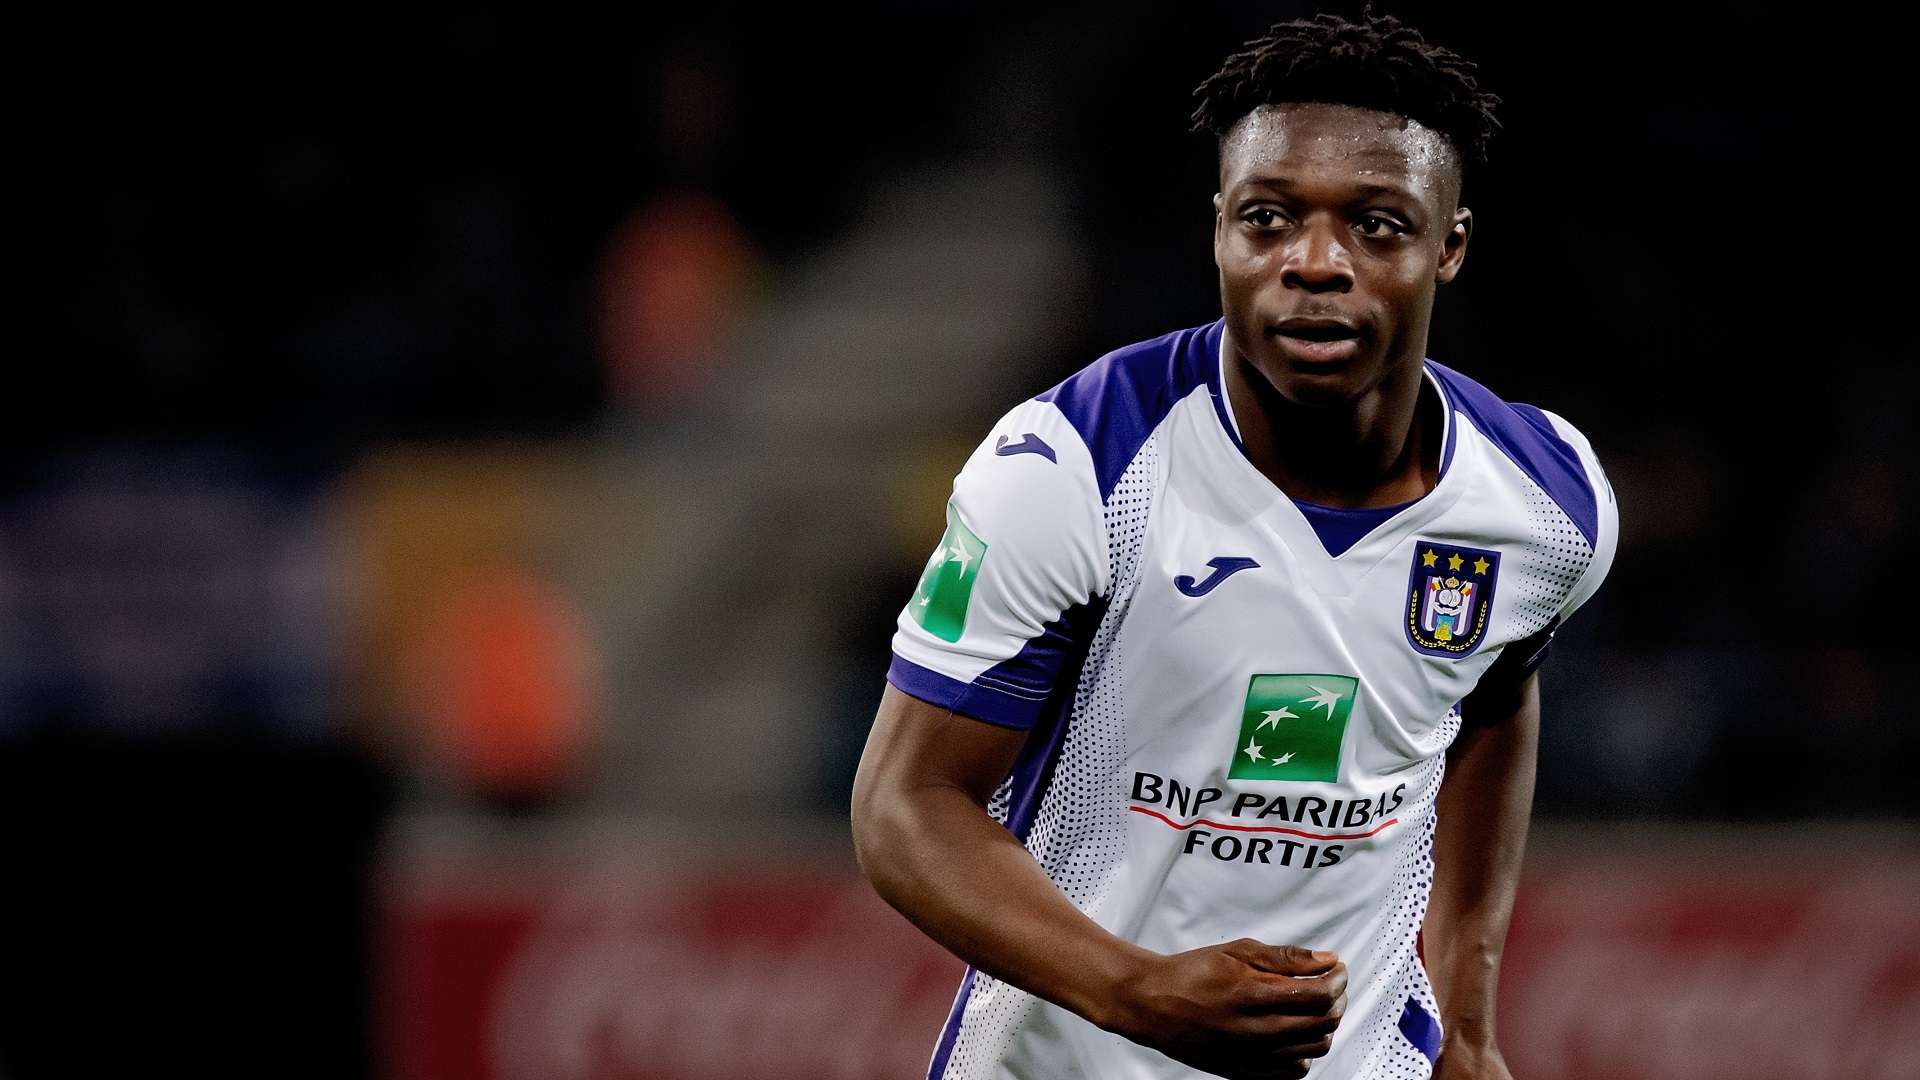 Jeremy Doku of Anderlecht during the Belgium Pro League match against Gent at the Ghelamco Arena on February 7, 2020